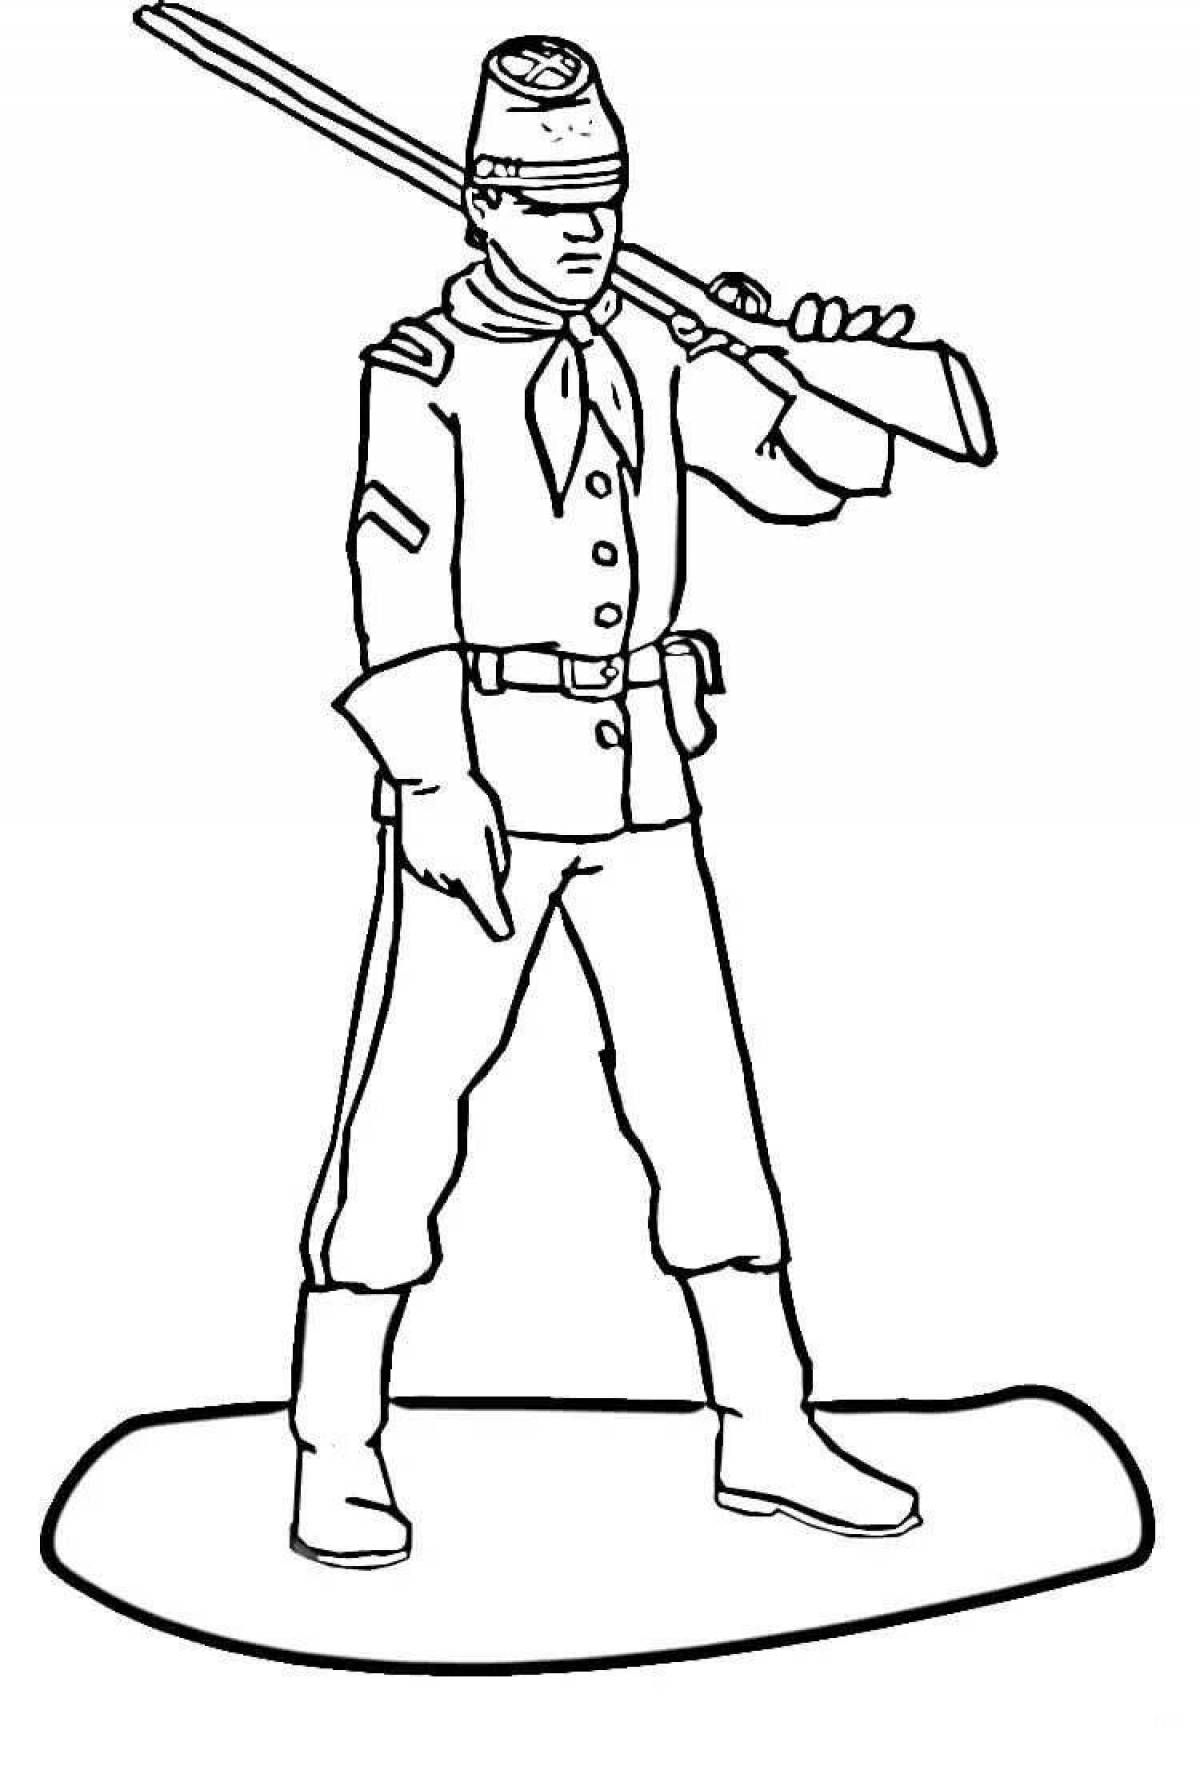 Glorious soldier coloring page